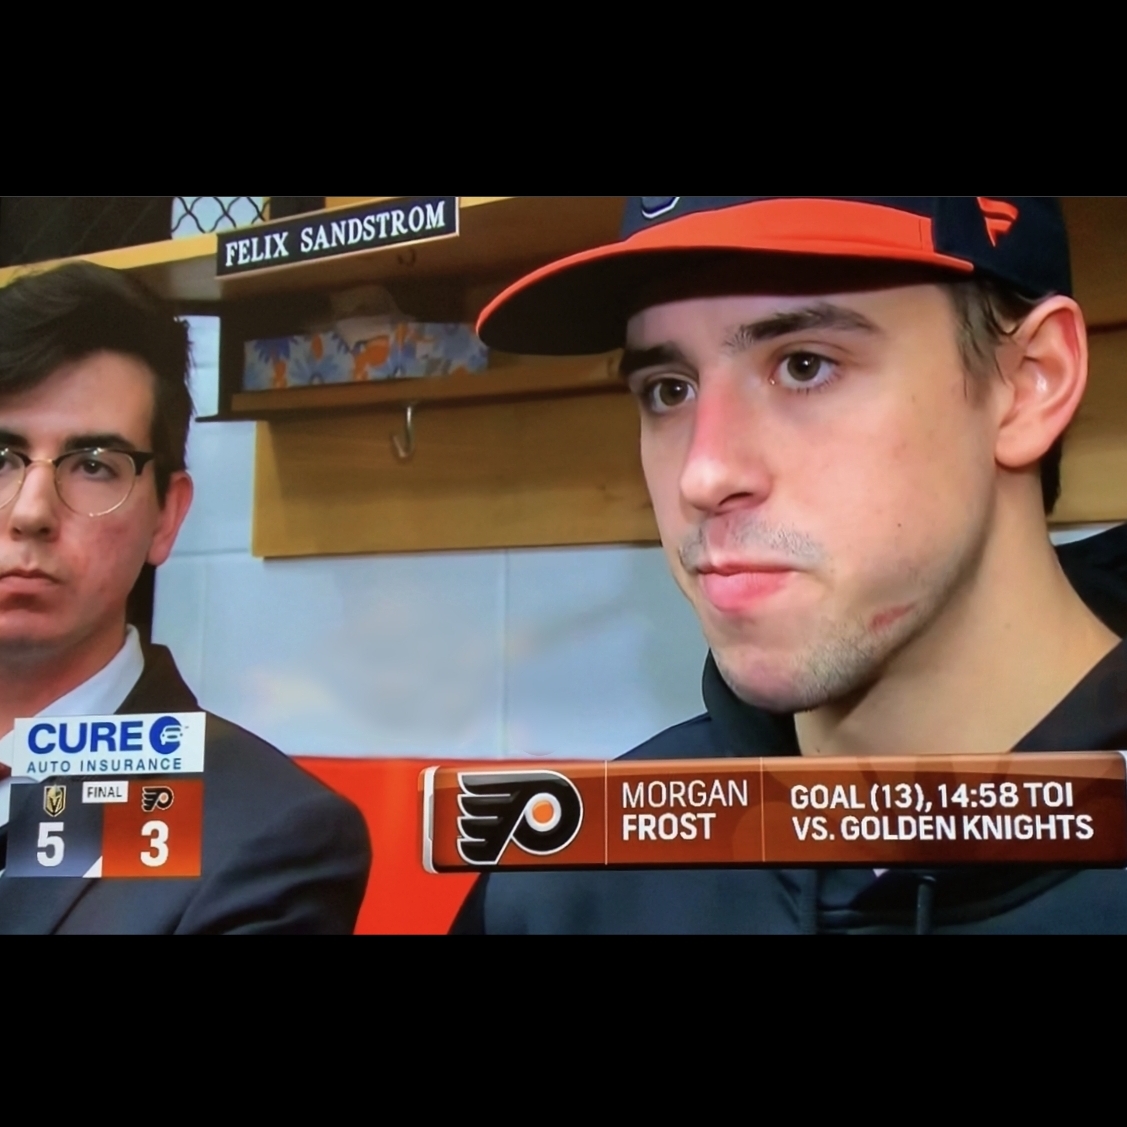 Cody, a white male with brown hair and glasses, wearing a white shirt, dark tie, and dark colored blazer, stands with Philadelphia Flyers forward Morgan Frost, a white male wearing a black Flyers sweatshirt and an orange-brimmed Flyers baseball cap, during a postgame media scrum in the Philadelphia locker room at Wells Fargo Center in Philadelphia, Pennsylvania. At the bottom of the frame, an animated on-screen chyron states that Morgan Frost scored his thirteenth goal of the season during the game and played fourteen minutes, fifty eight seconds of ice time in the Flyers' five-to-three loss against the Vegas Golden Knights.